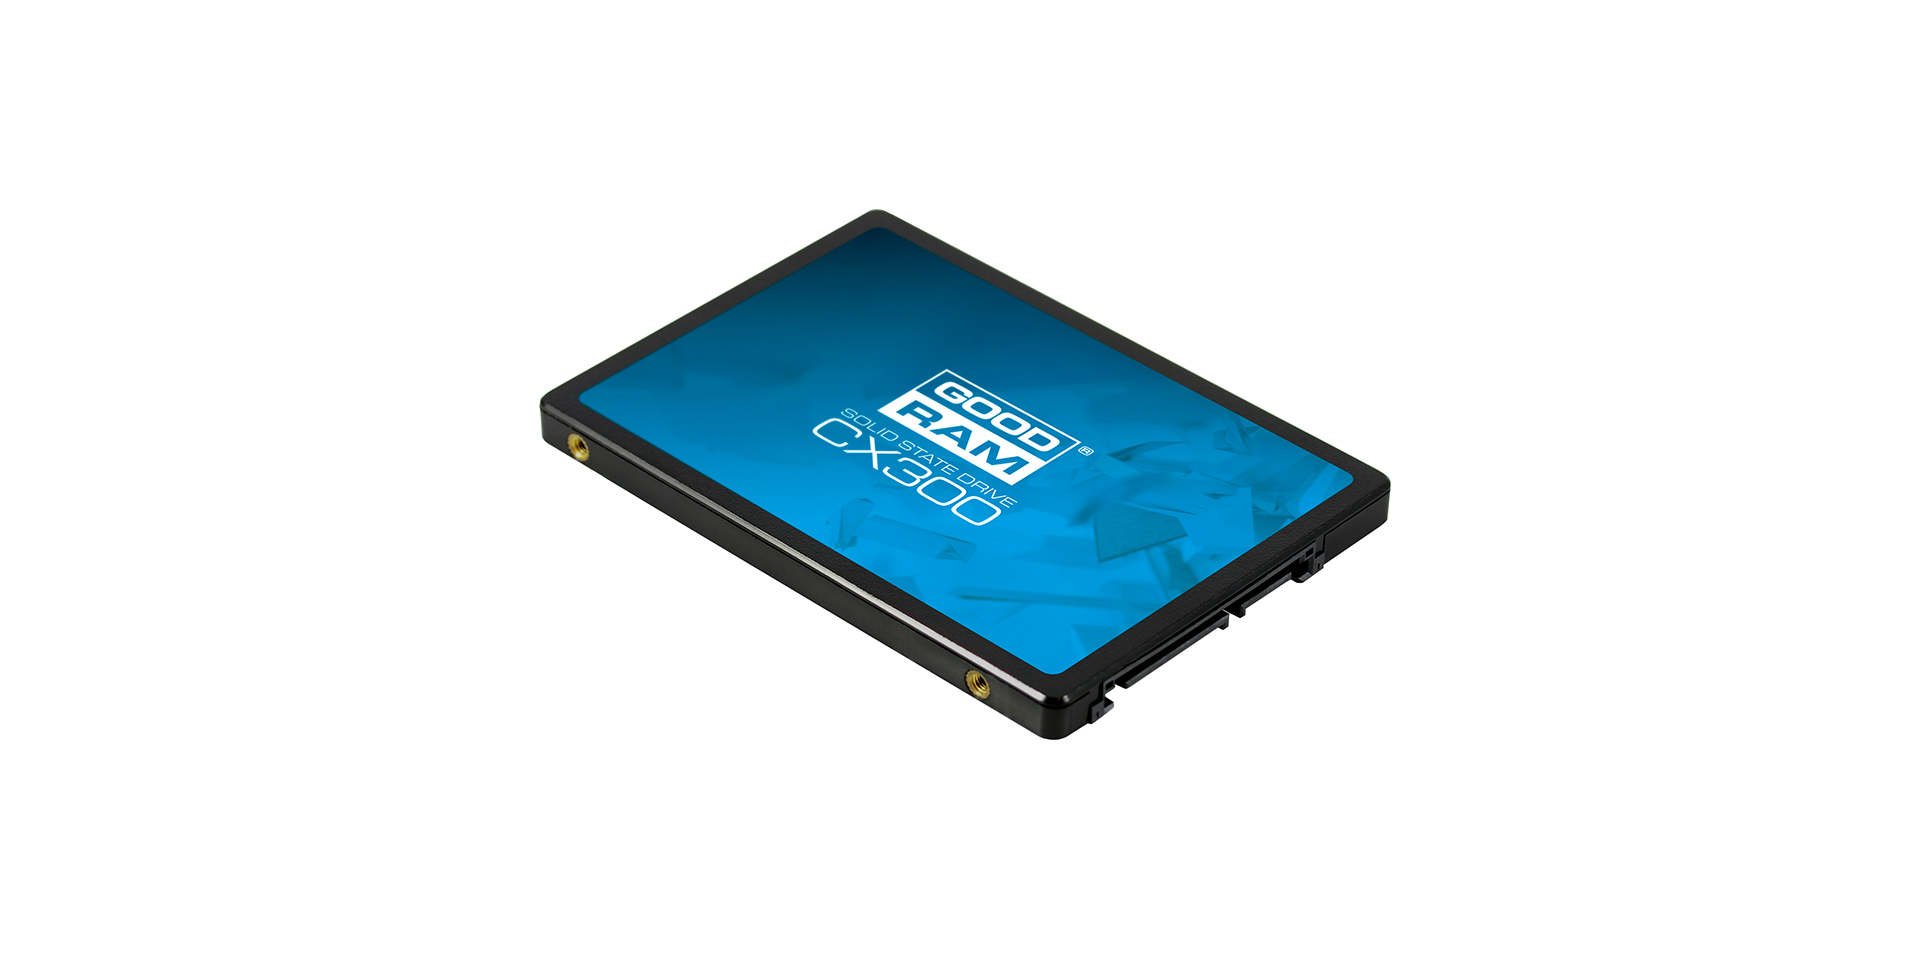 CX300 solid state drive